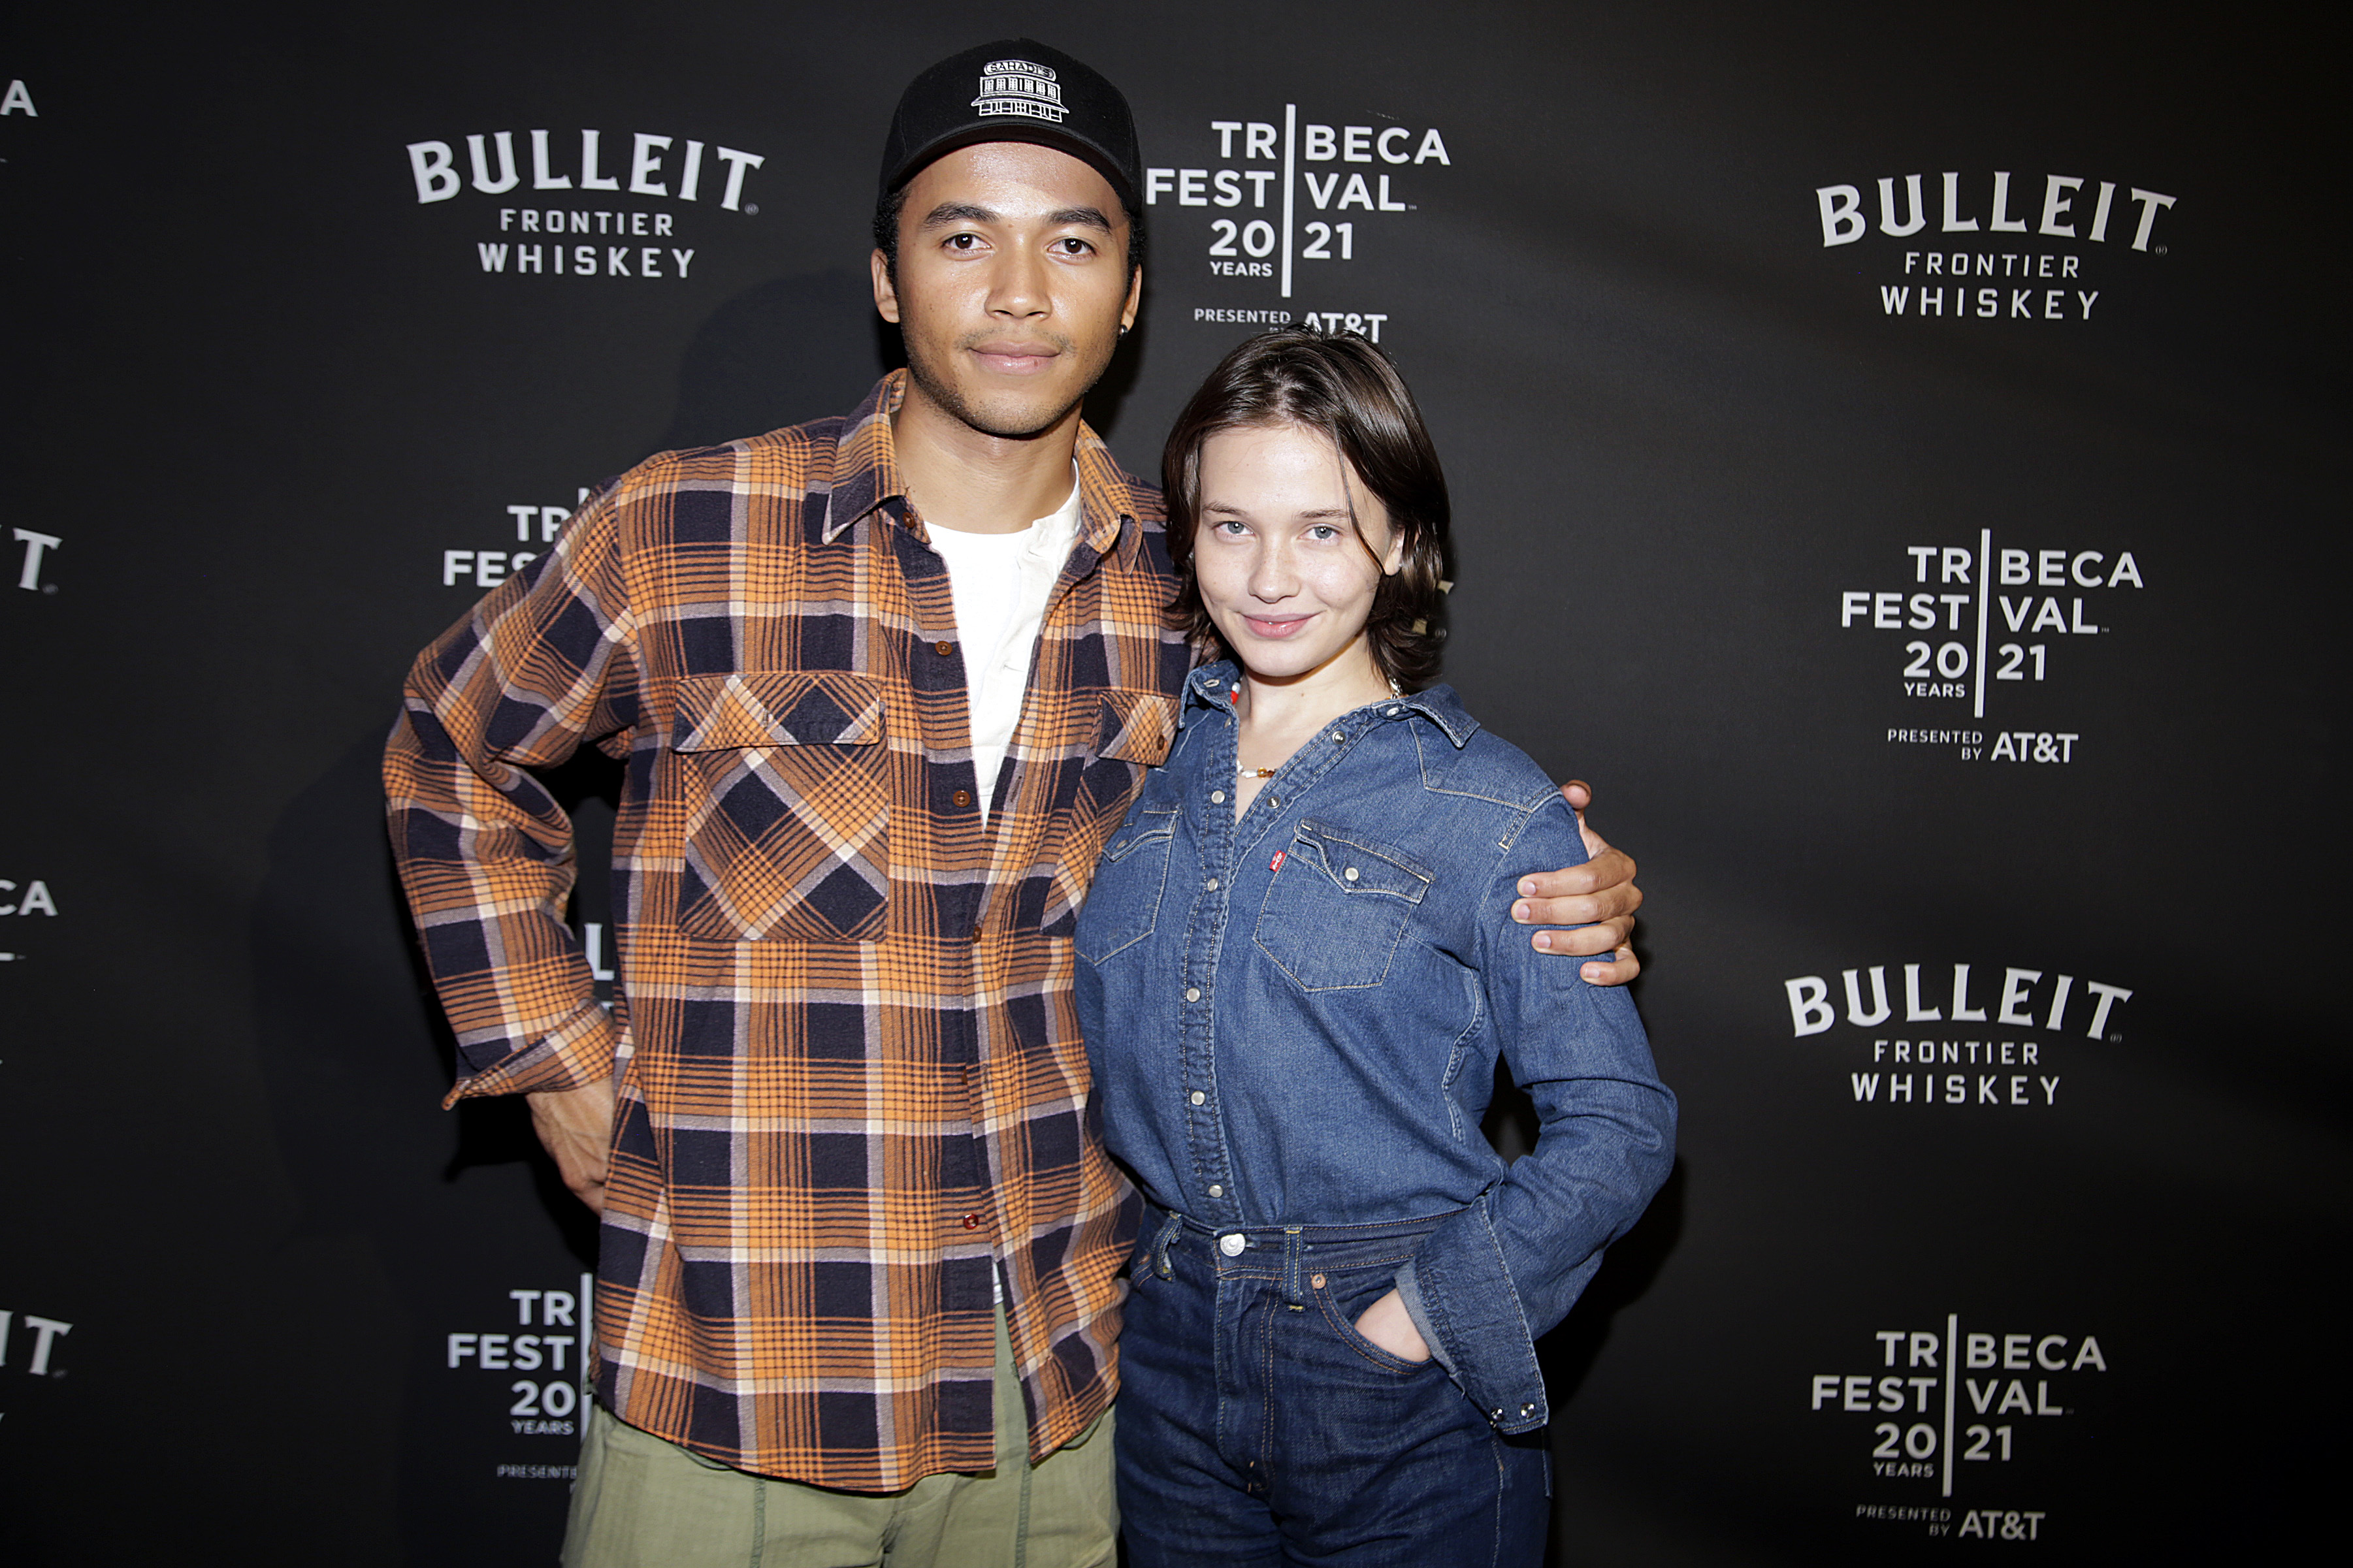 Raymond Alexander Cham Jr. and Cailee Spaeny at the Tribeca Festival after party on June 12, 2021, in New York City. | Source: Getty Images